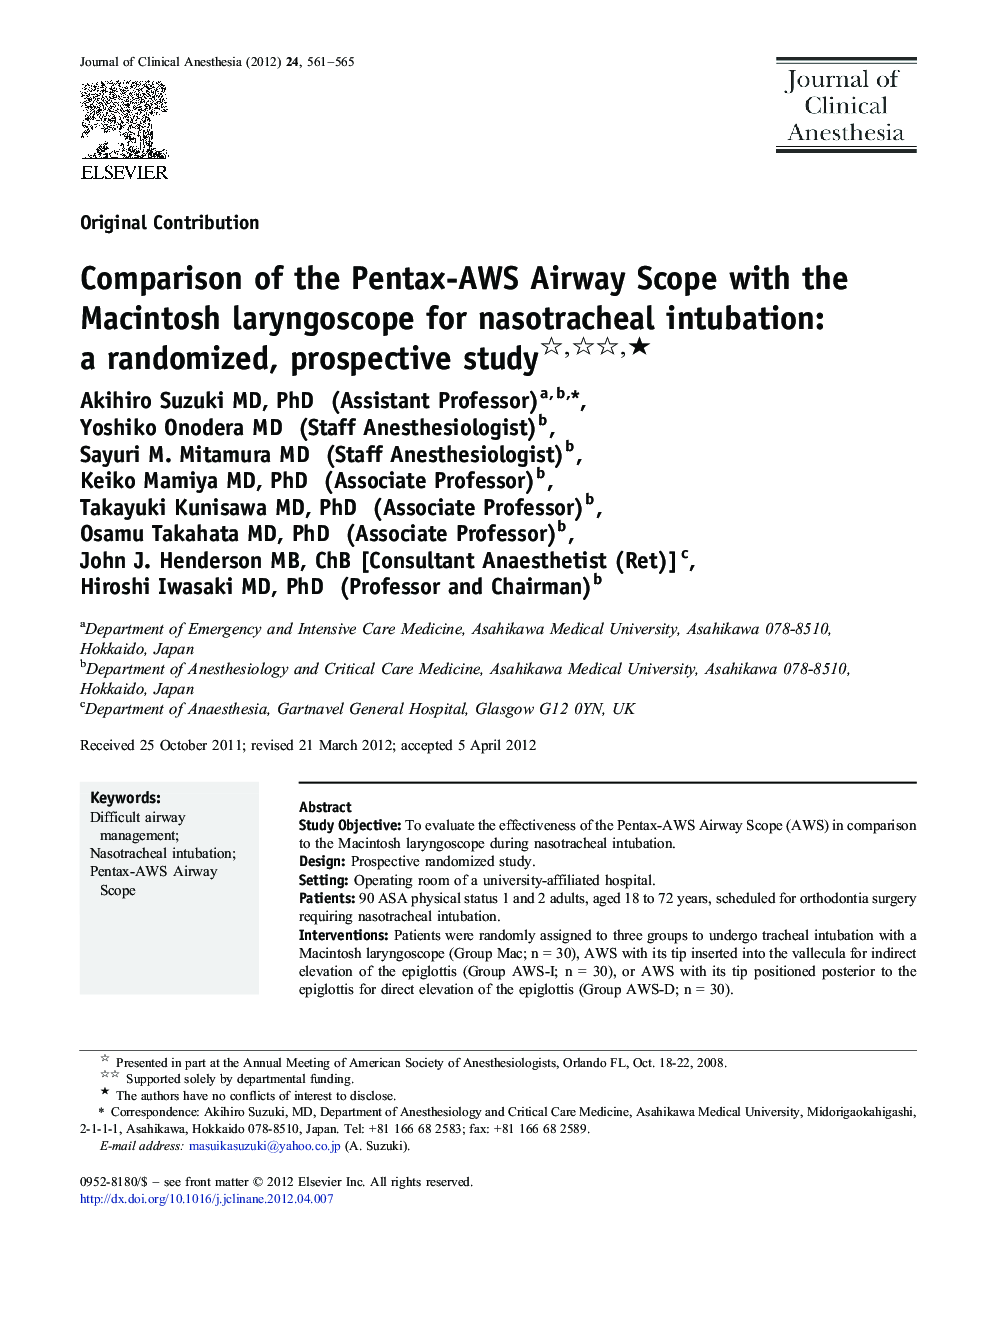 Comparison of the Pentax-AWS Airway Scope with the Macintosh laryngoscope for nasotracheal intubation: a randomized, prospective study ★